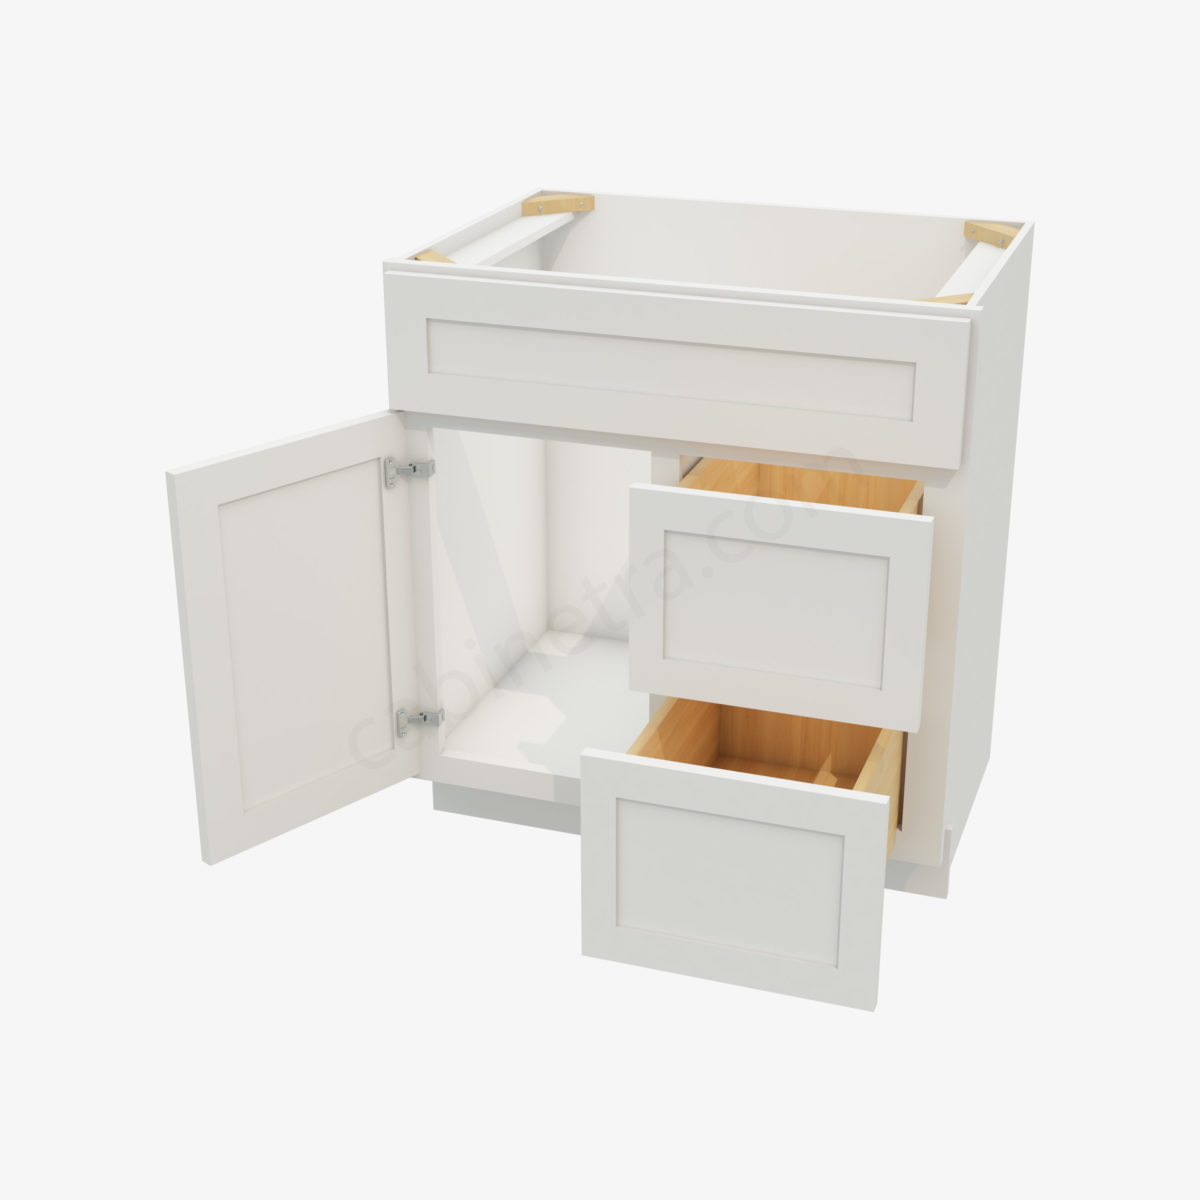 AW S3021DR 34 5 Forevermark Ice White Shaker Cabinetra scaled